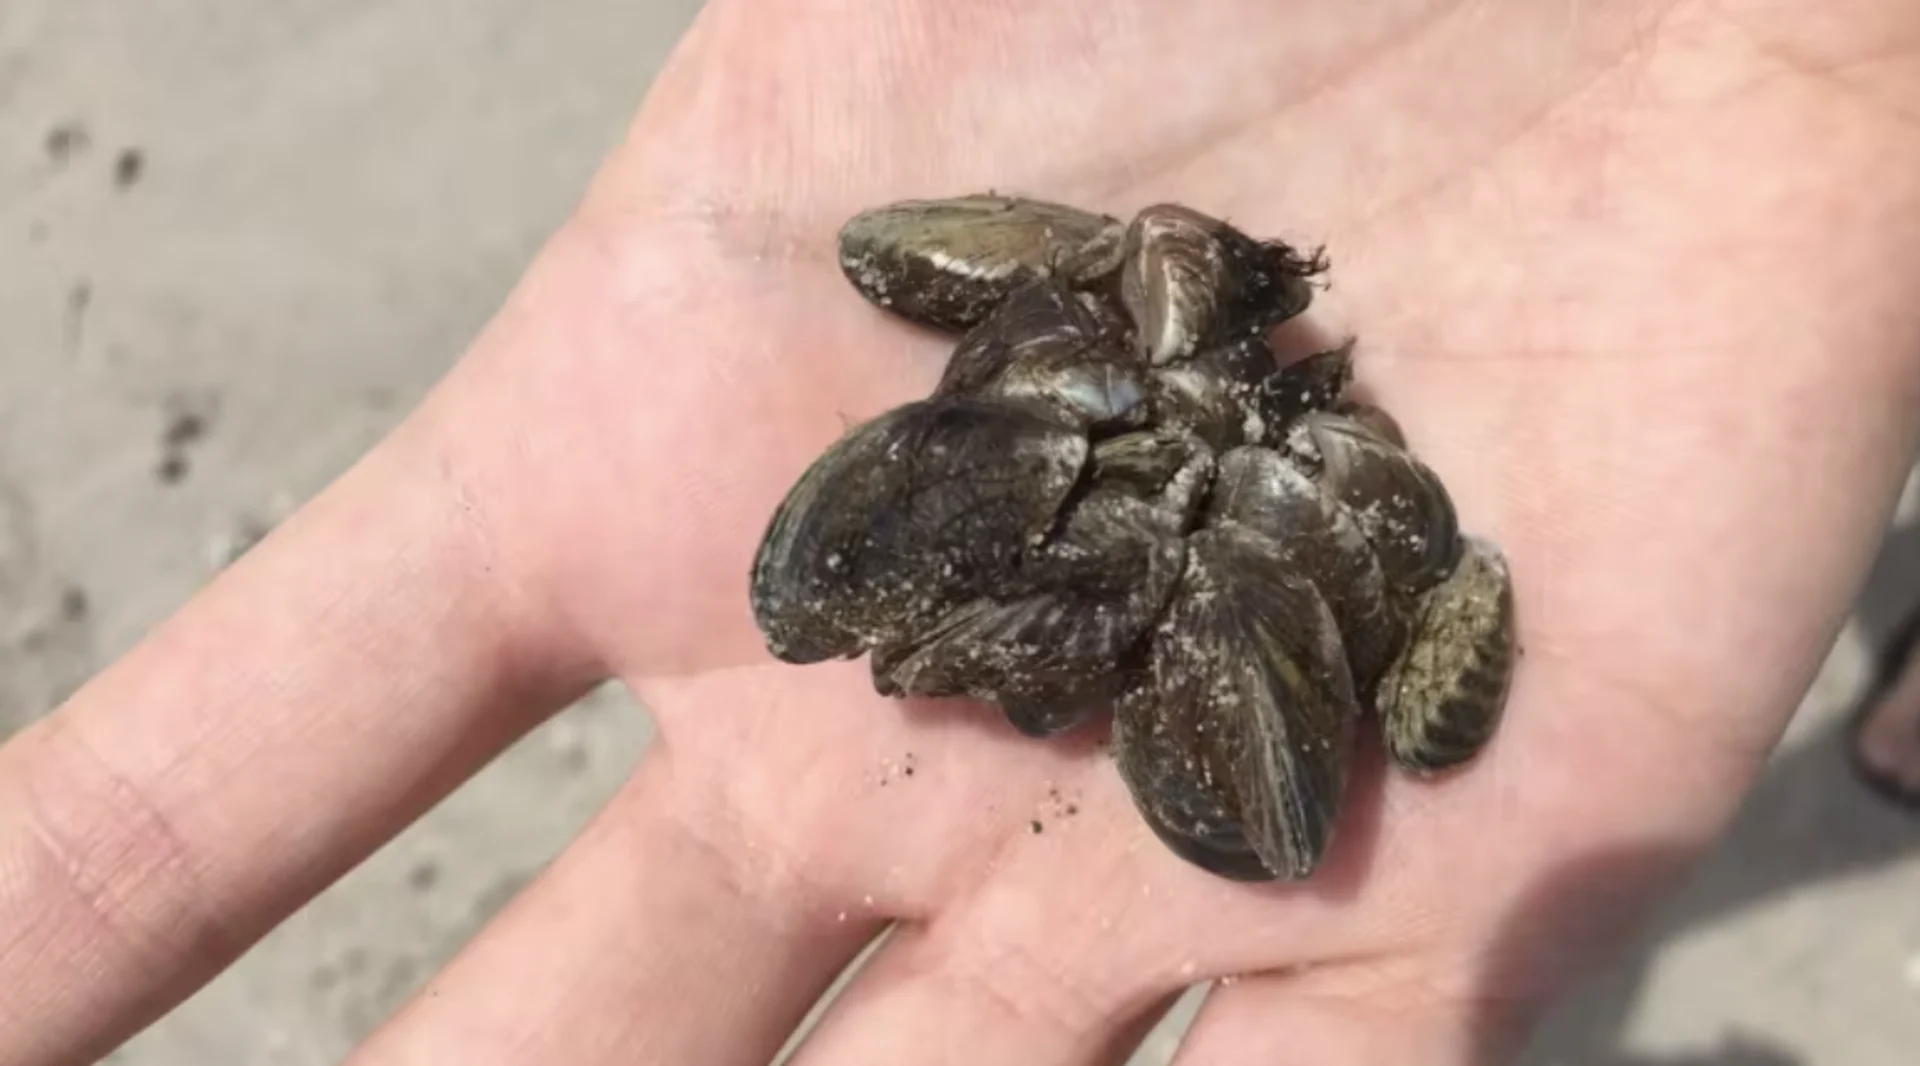 Zebra mussels found in Riding Mountain National Park lake, says Parks Canada